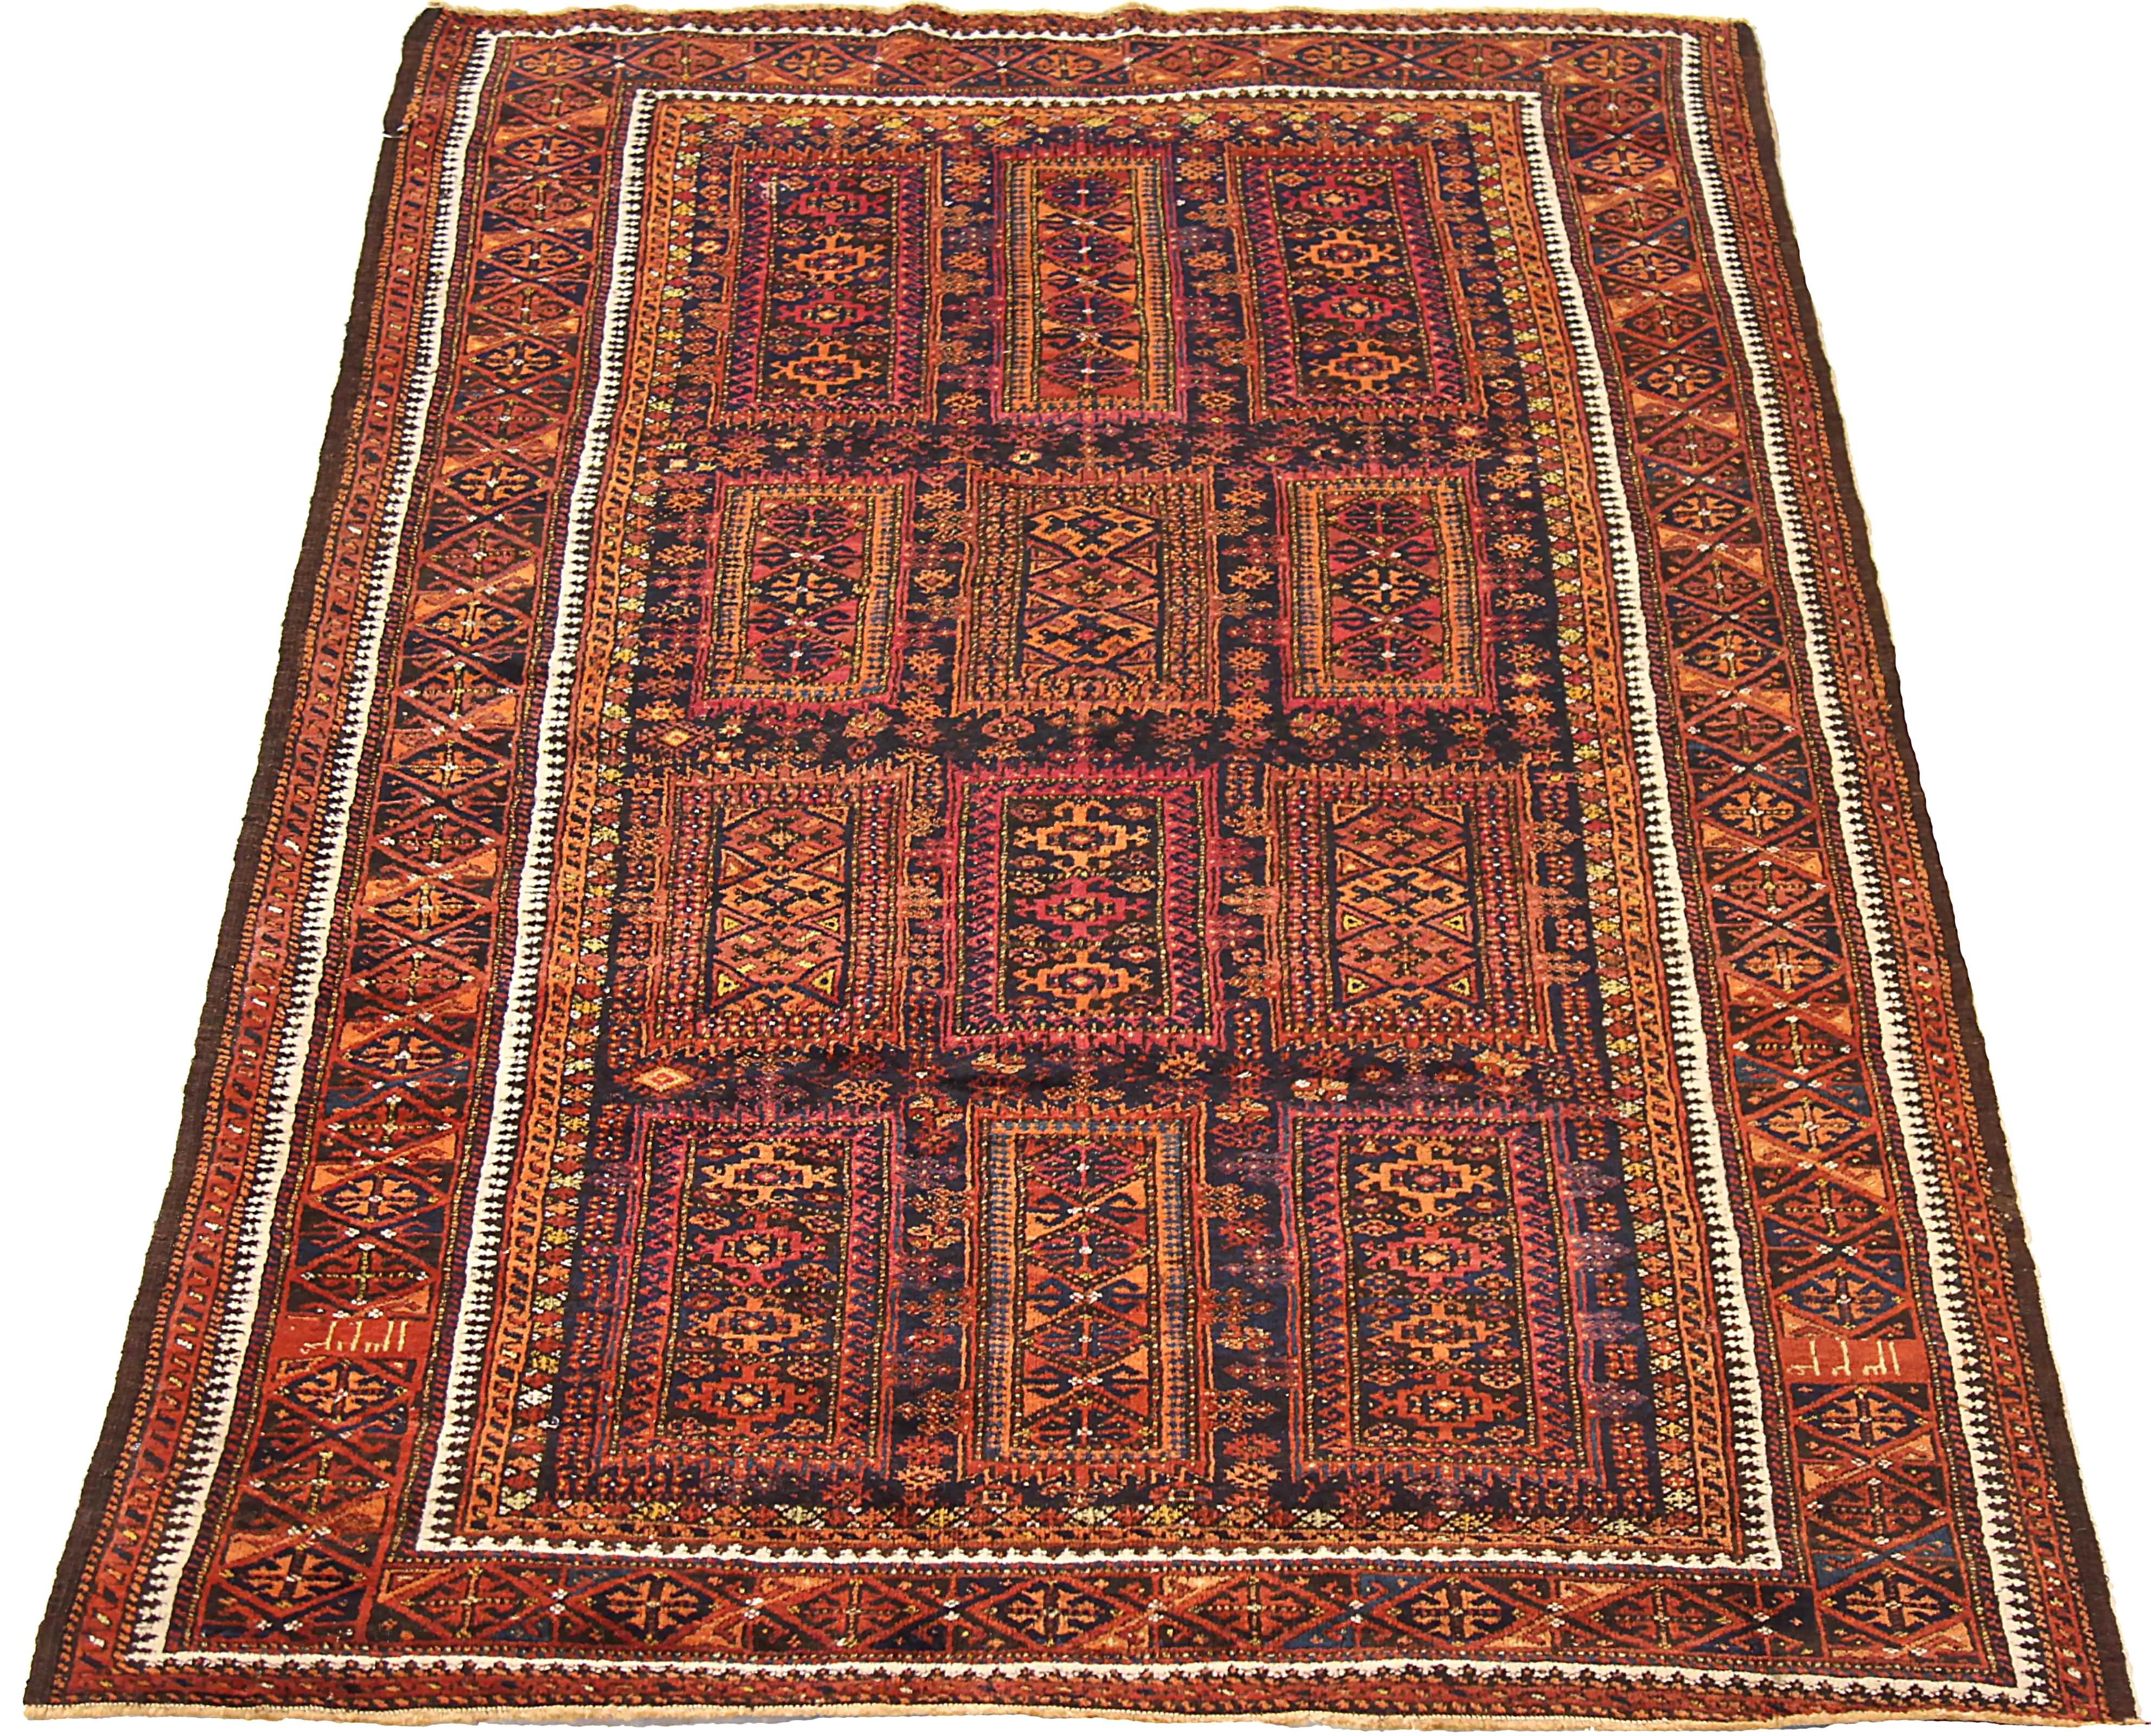 Antique Persian area rug handwoven from the finest sheep’s wool. It’s colored with all-natural vegetable dyes that are safe for humans and pets. It’s a traditional Balouch design handwoven by expert artisans. It’s a lovely area rug that can be